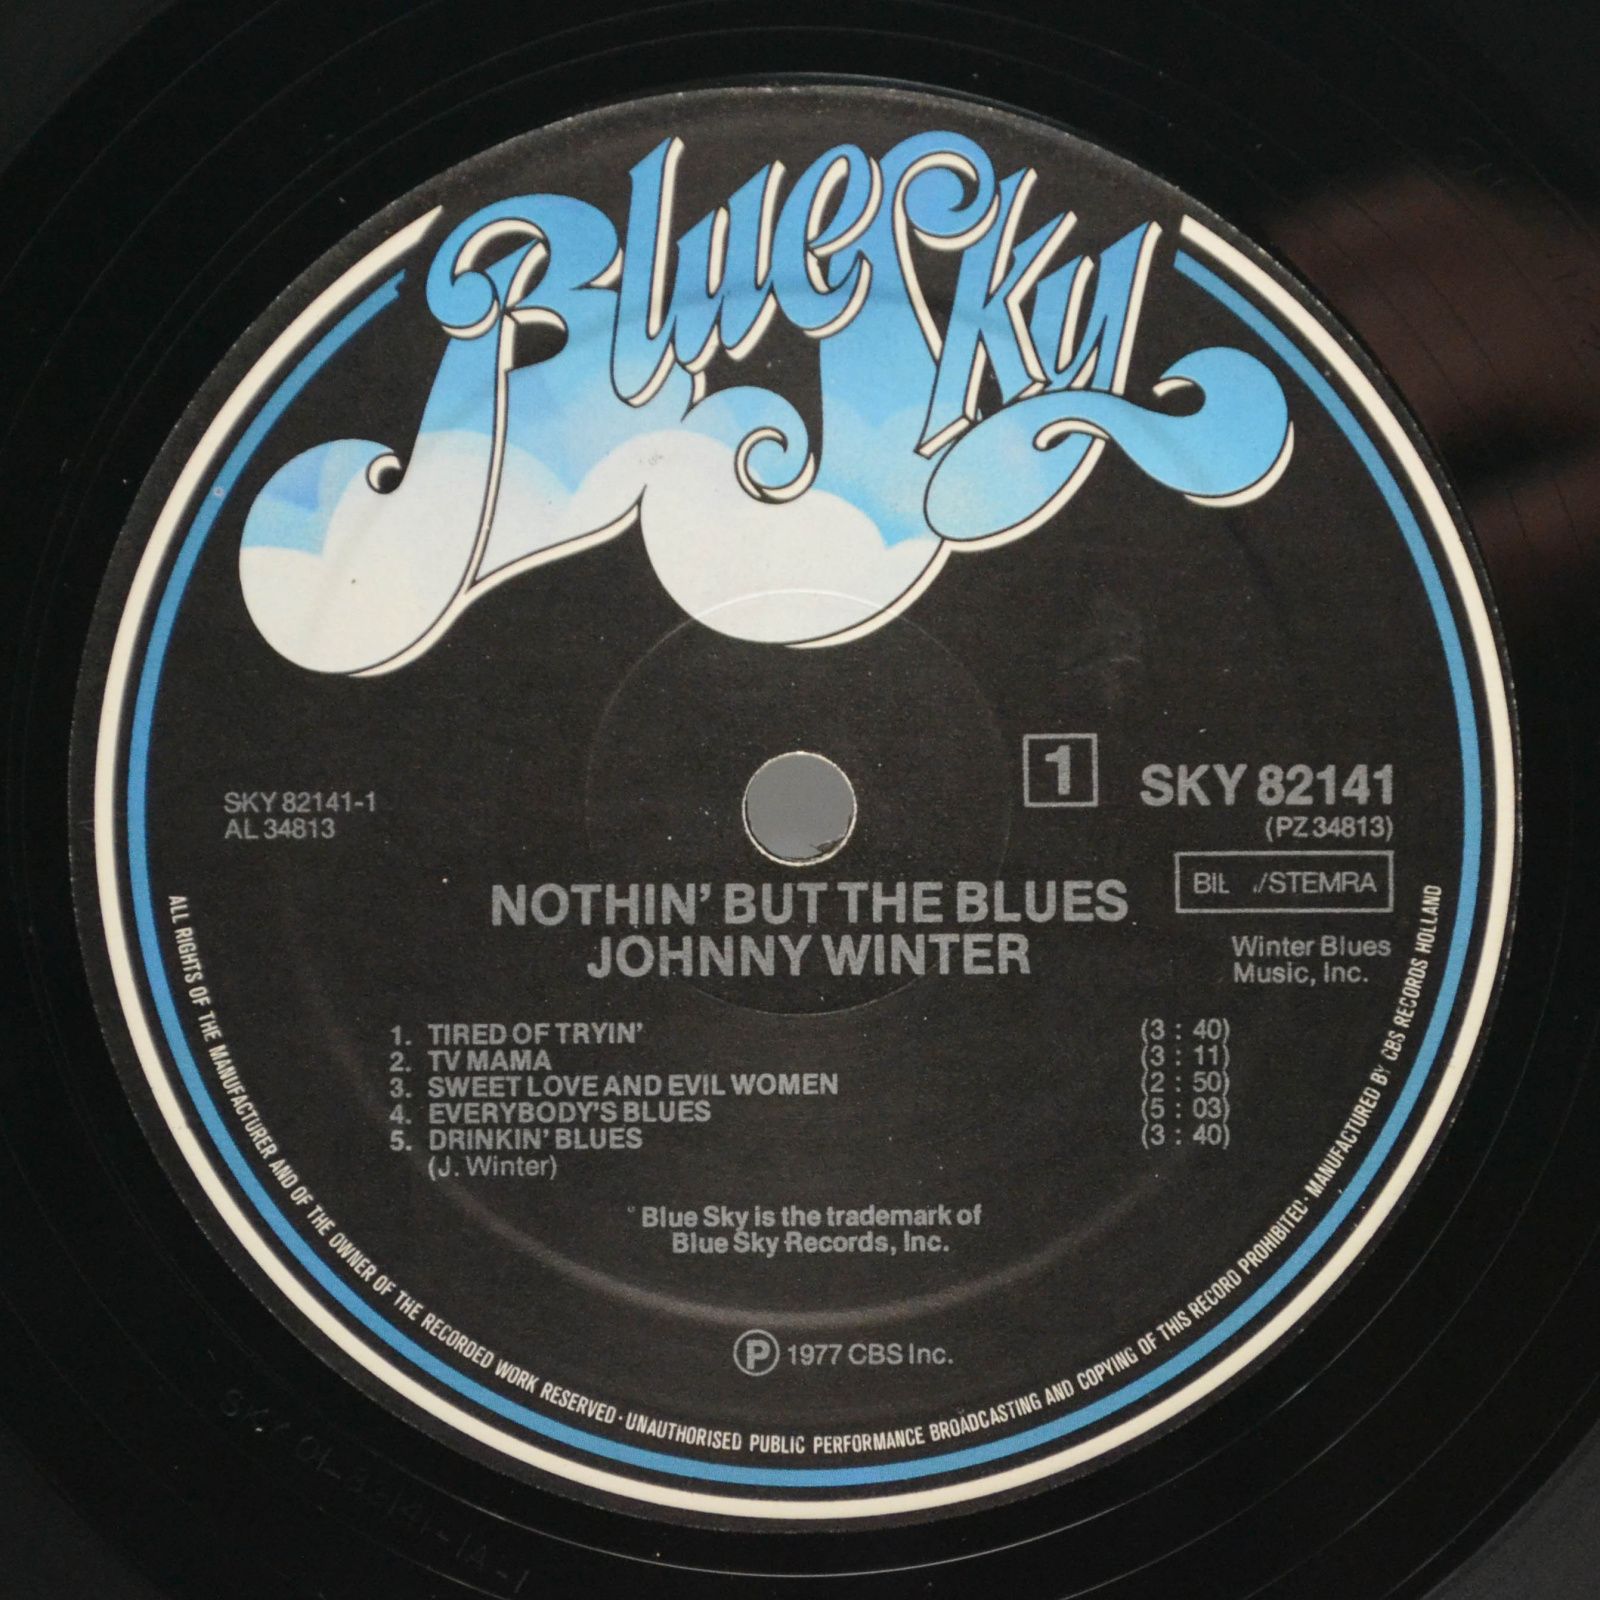 Johnny Winter — Nothin' But The Blues, 1977